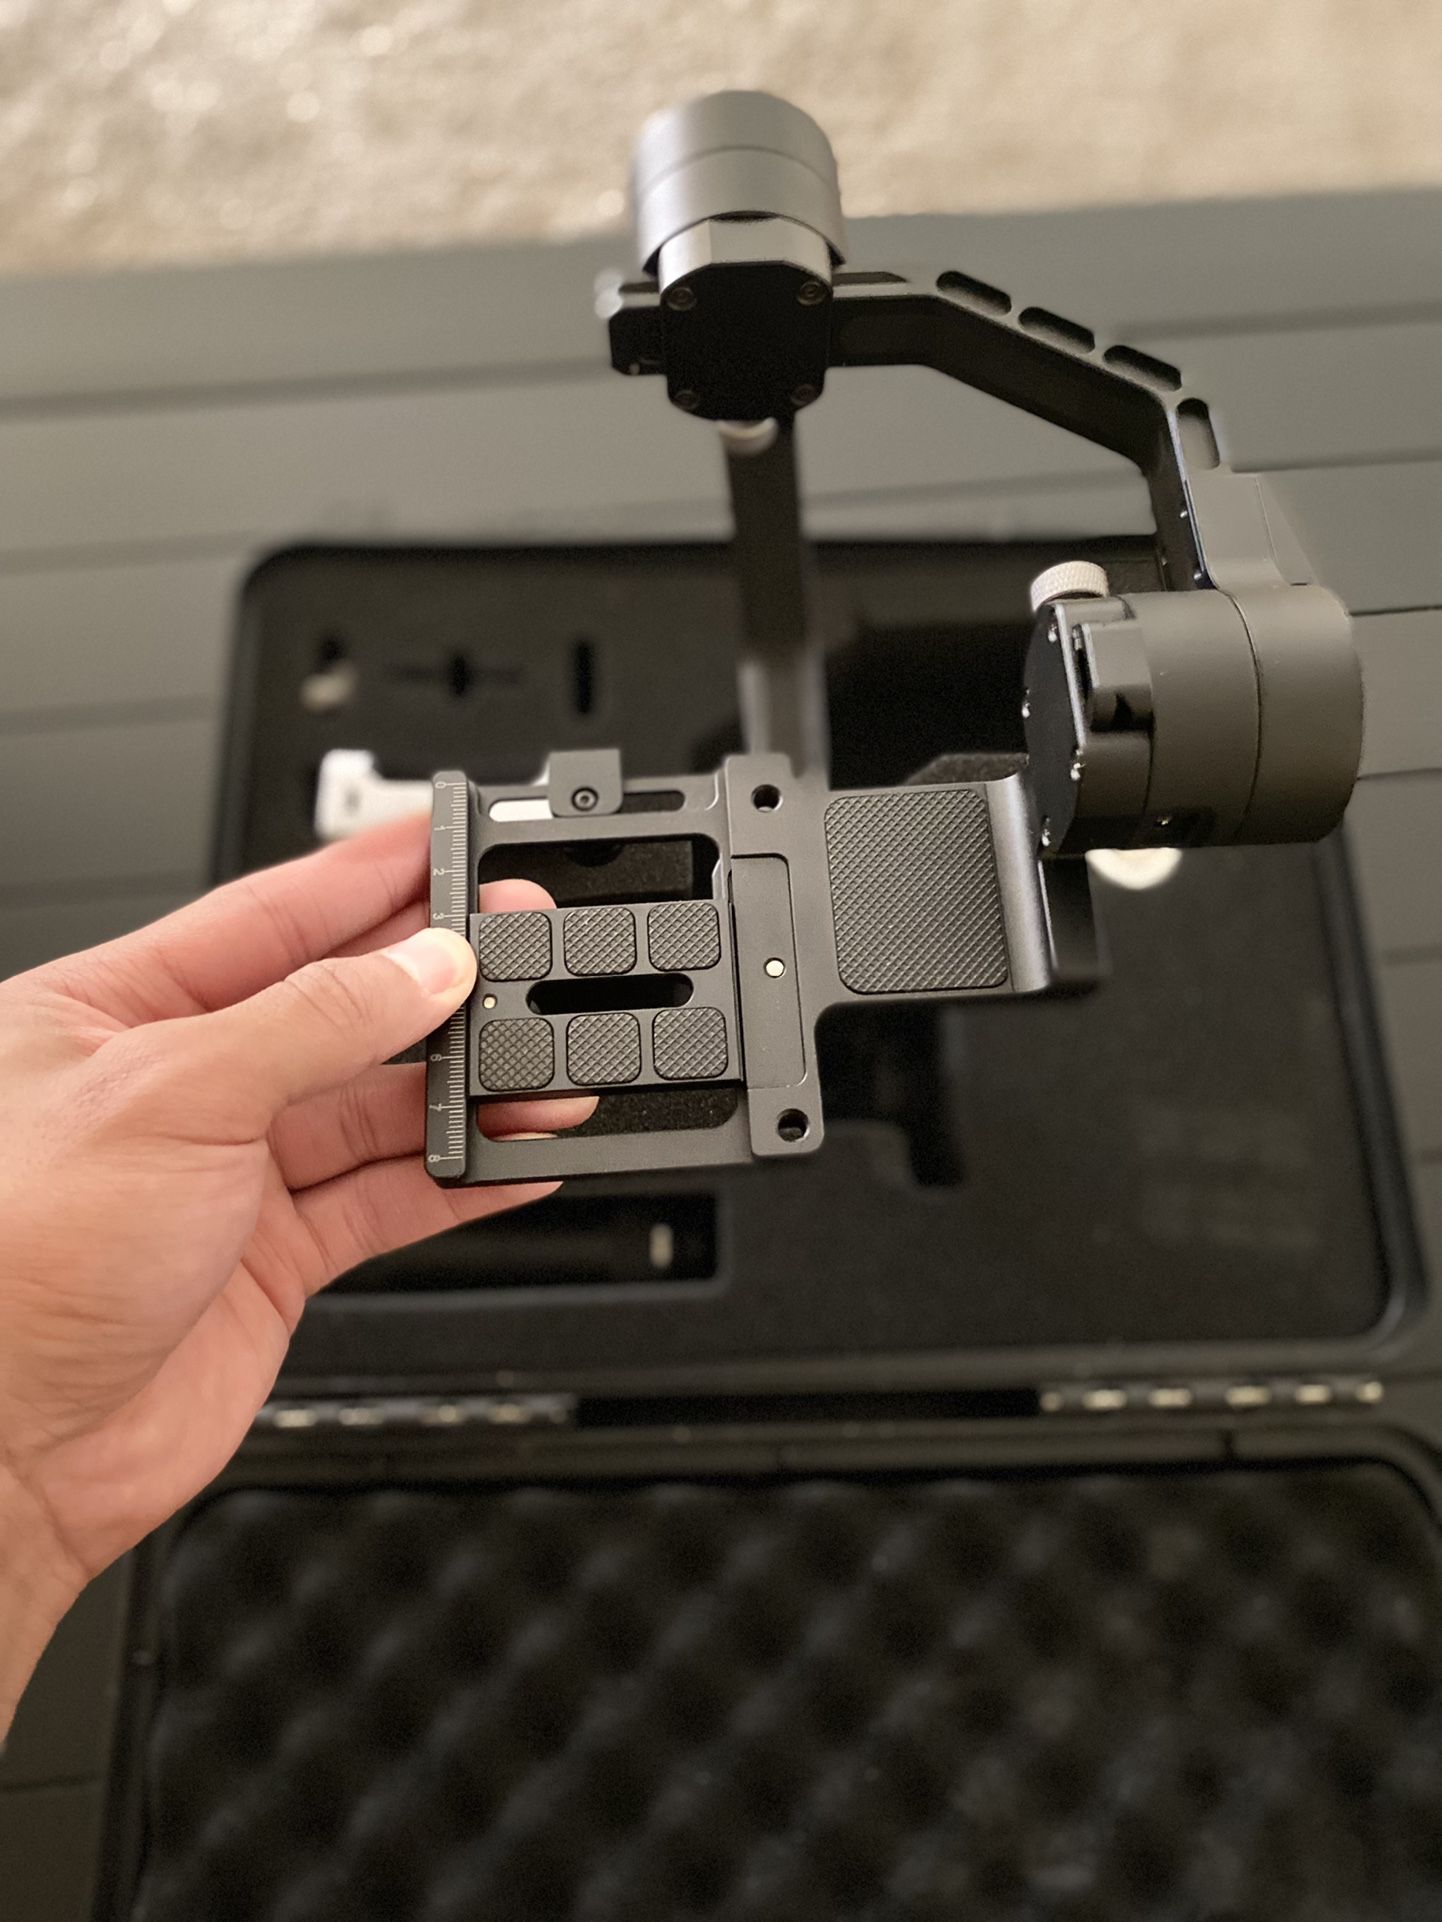 Zhiyun Crane 3-Axis Gimbal Stabilizer for DSLR and Mirrorless Cameras